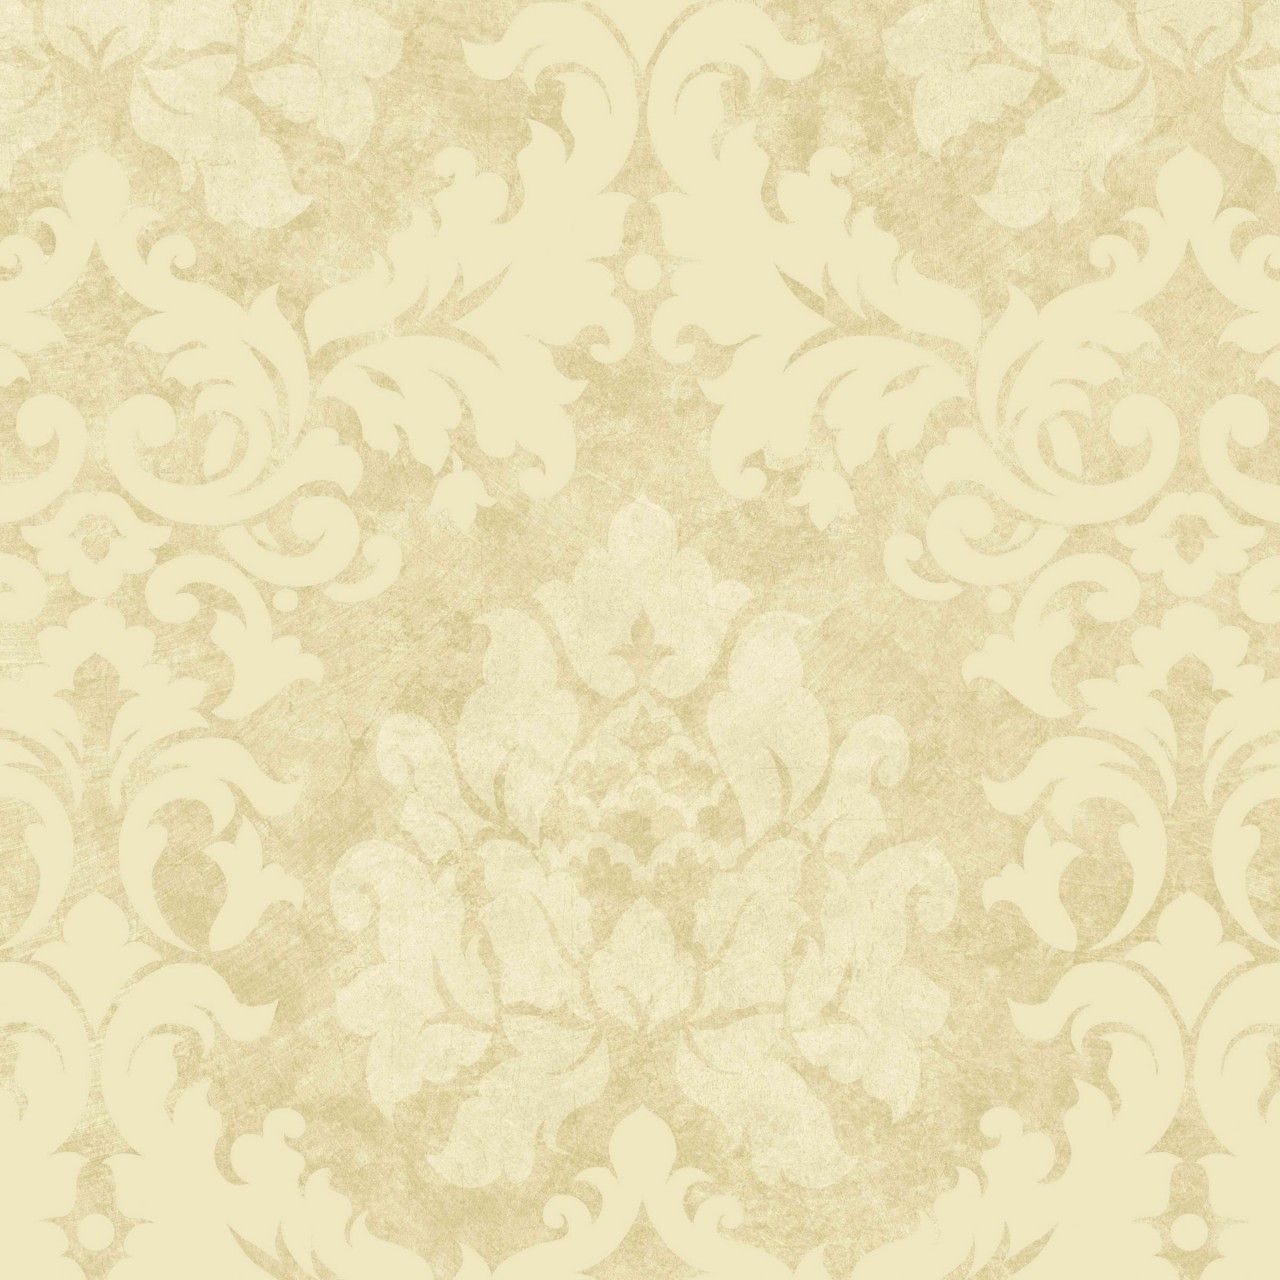 Buy Traditional Wallpaper Online, Traditional Wallpaper Ideas and ...